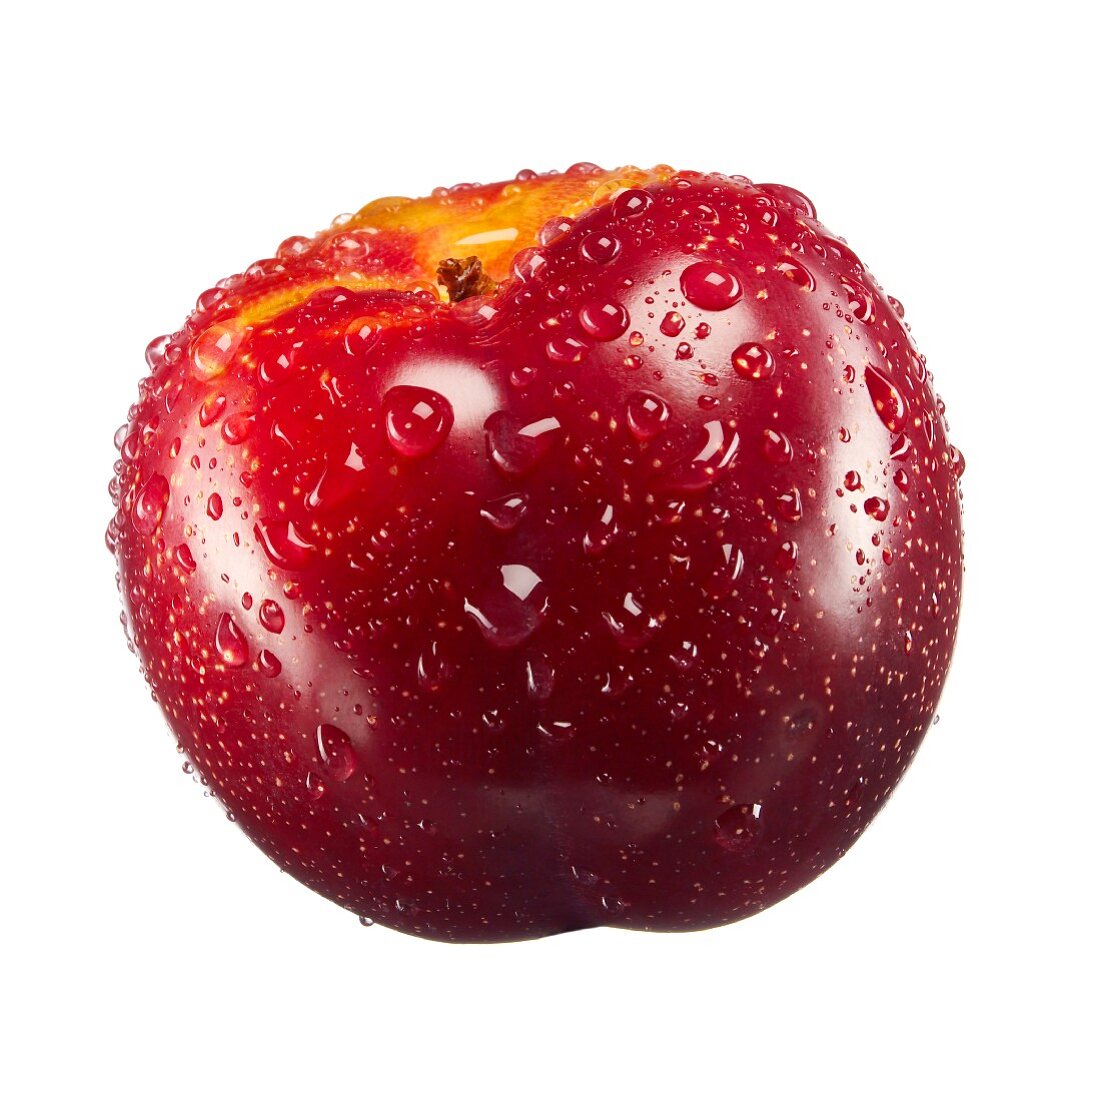 A red plum with water droplets